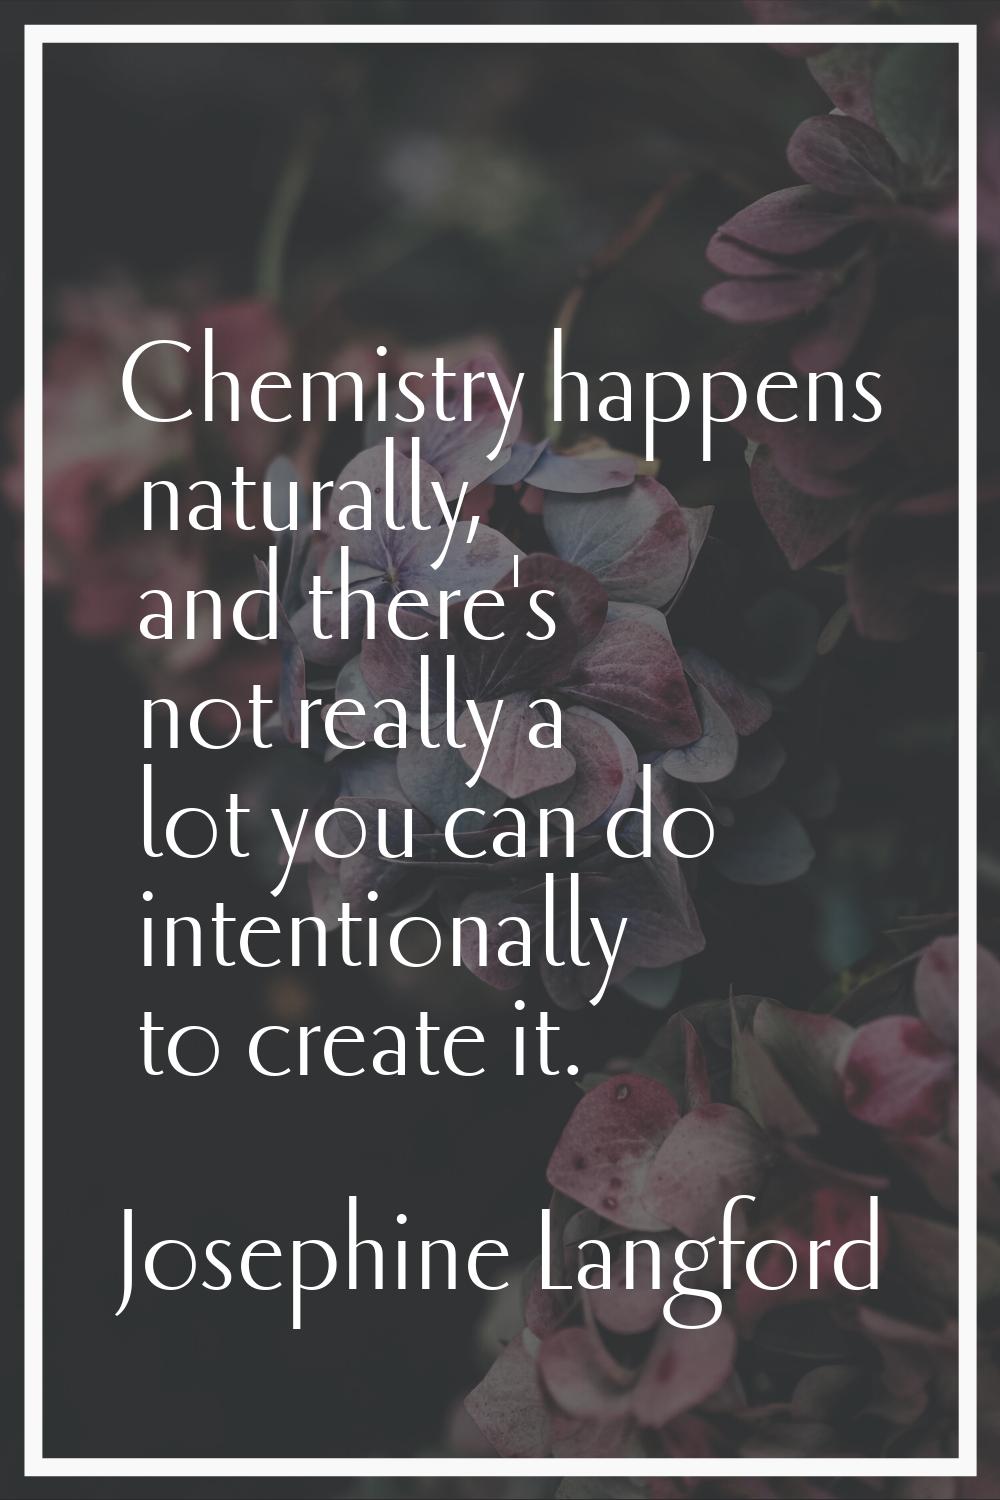 Chemistry happens naturally, and there's not really a lot you can do intentionally to create it.